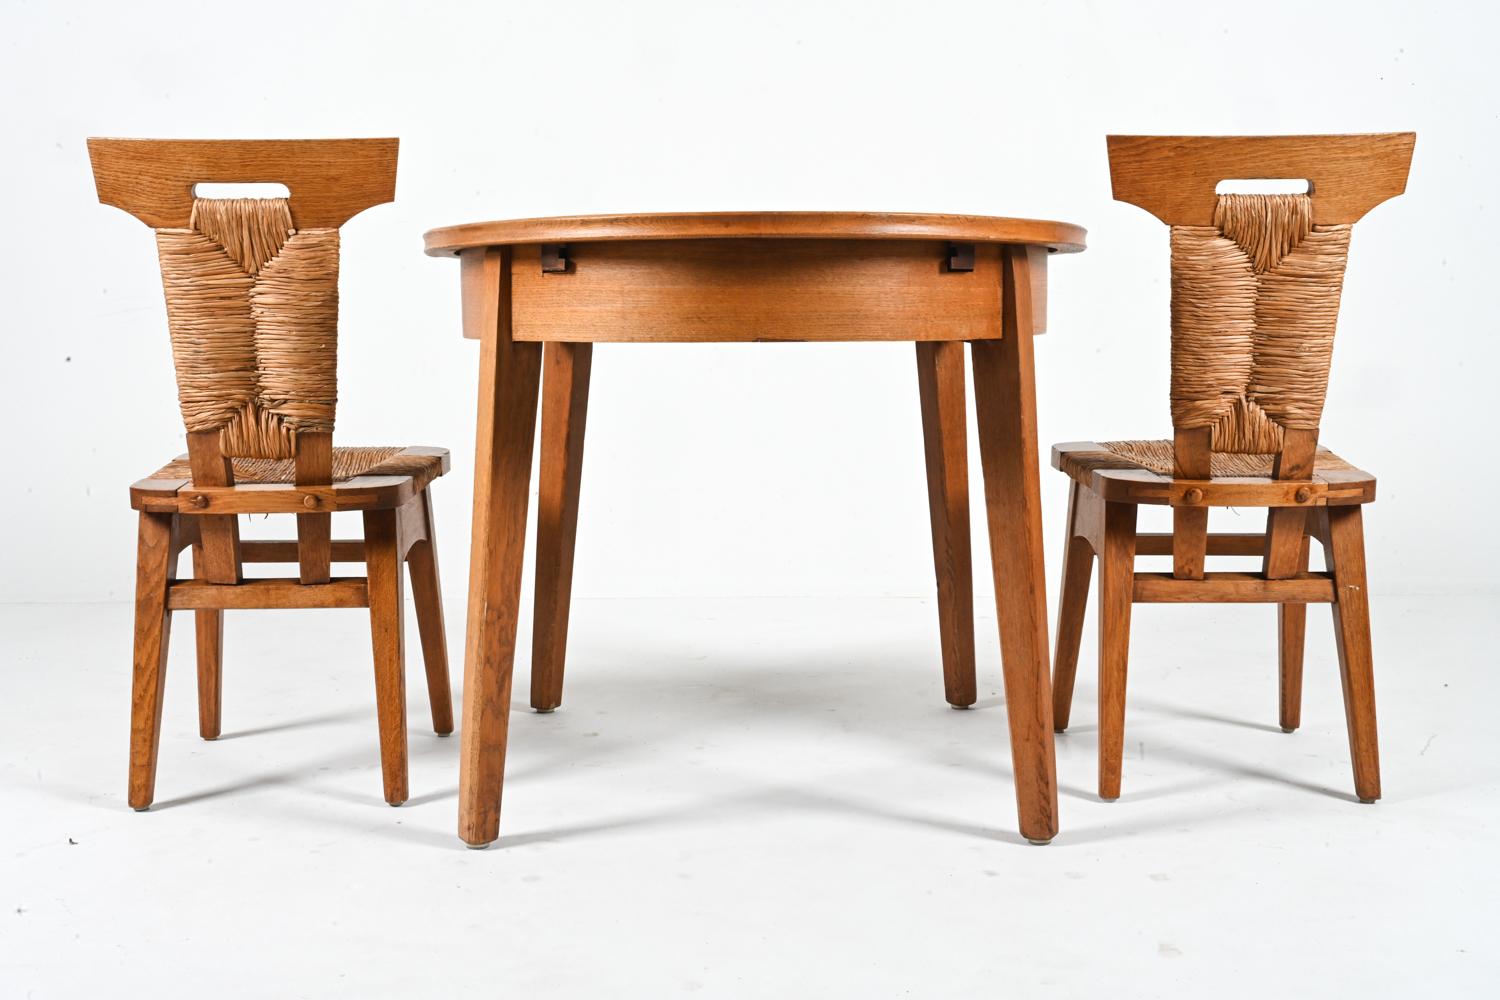 W. Kuyper Dutch Arts & Crafts Dining Suite in Oak & Rush, c. 1920s For Sale 10